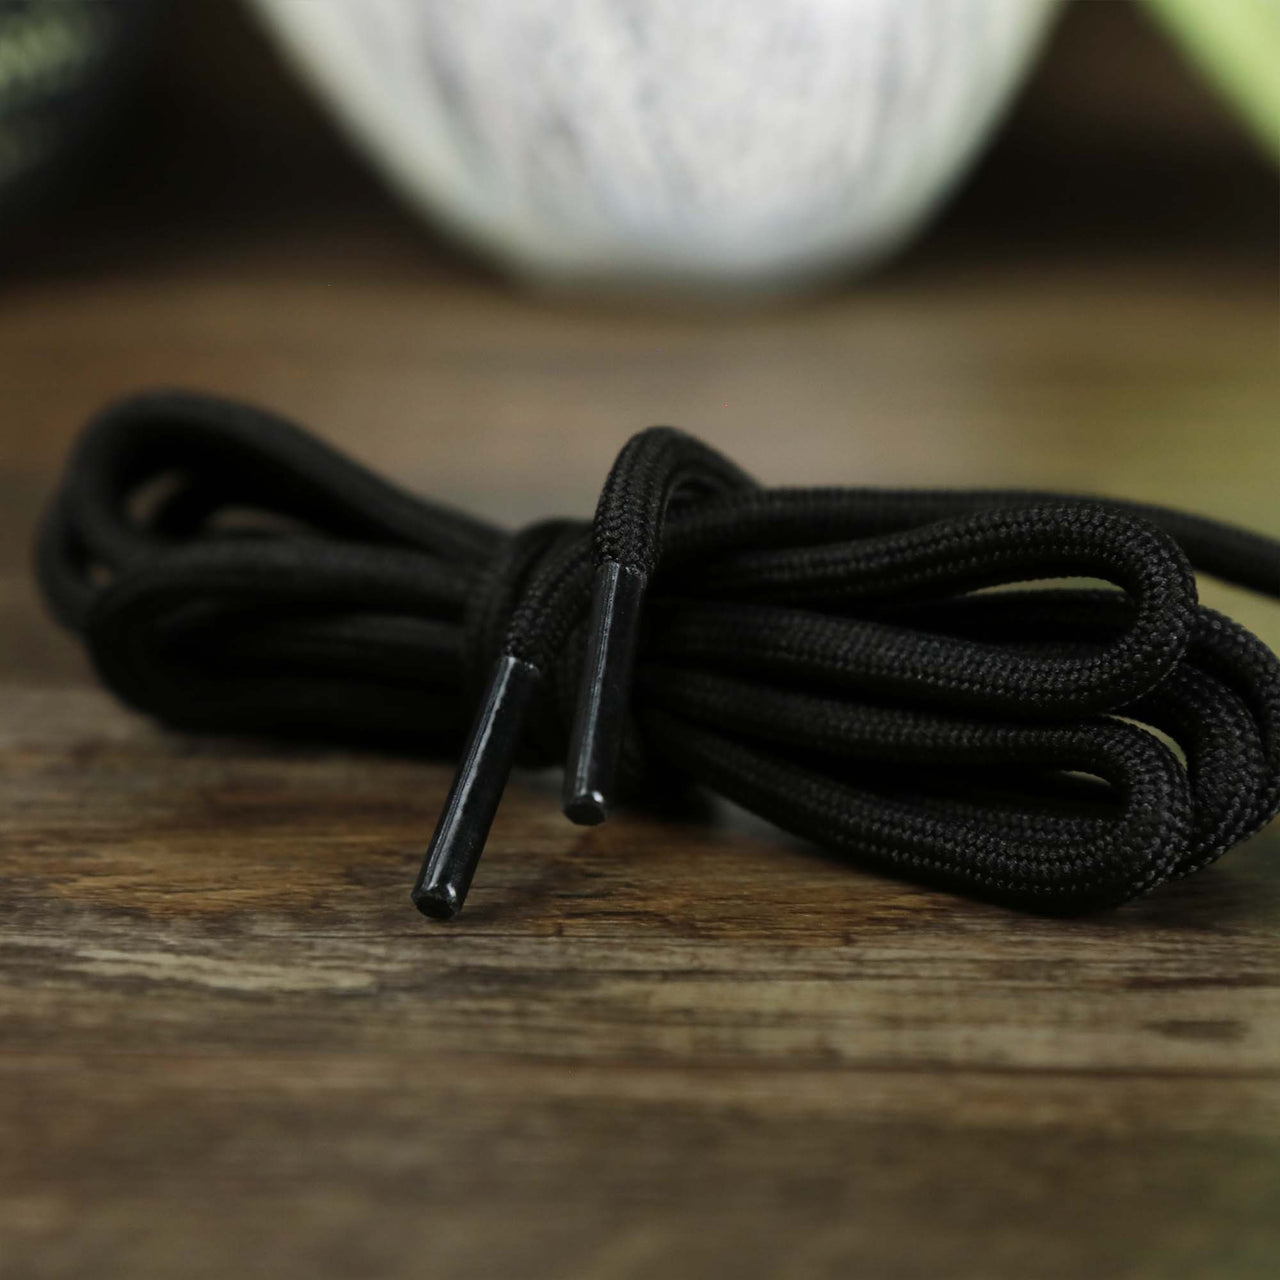 The aglets on the Solid Rope Black Shoelaces with Black Aglets | 120cm Capswag